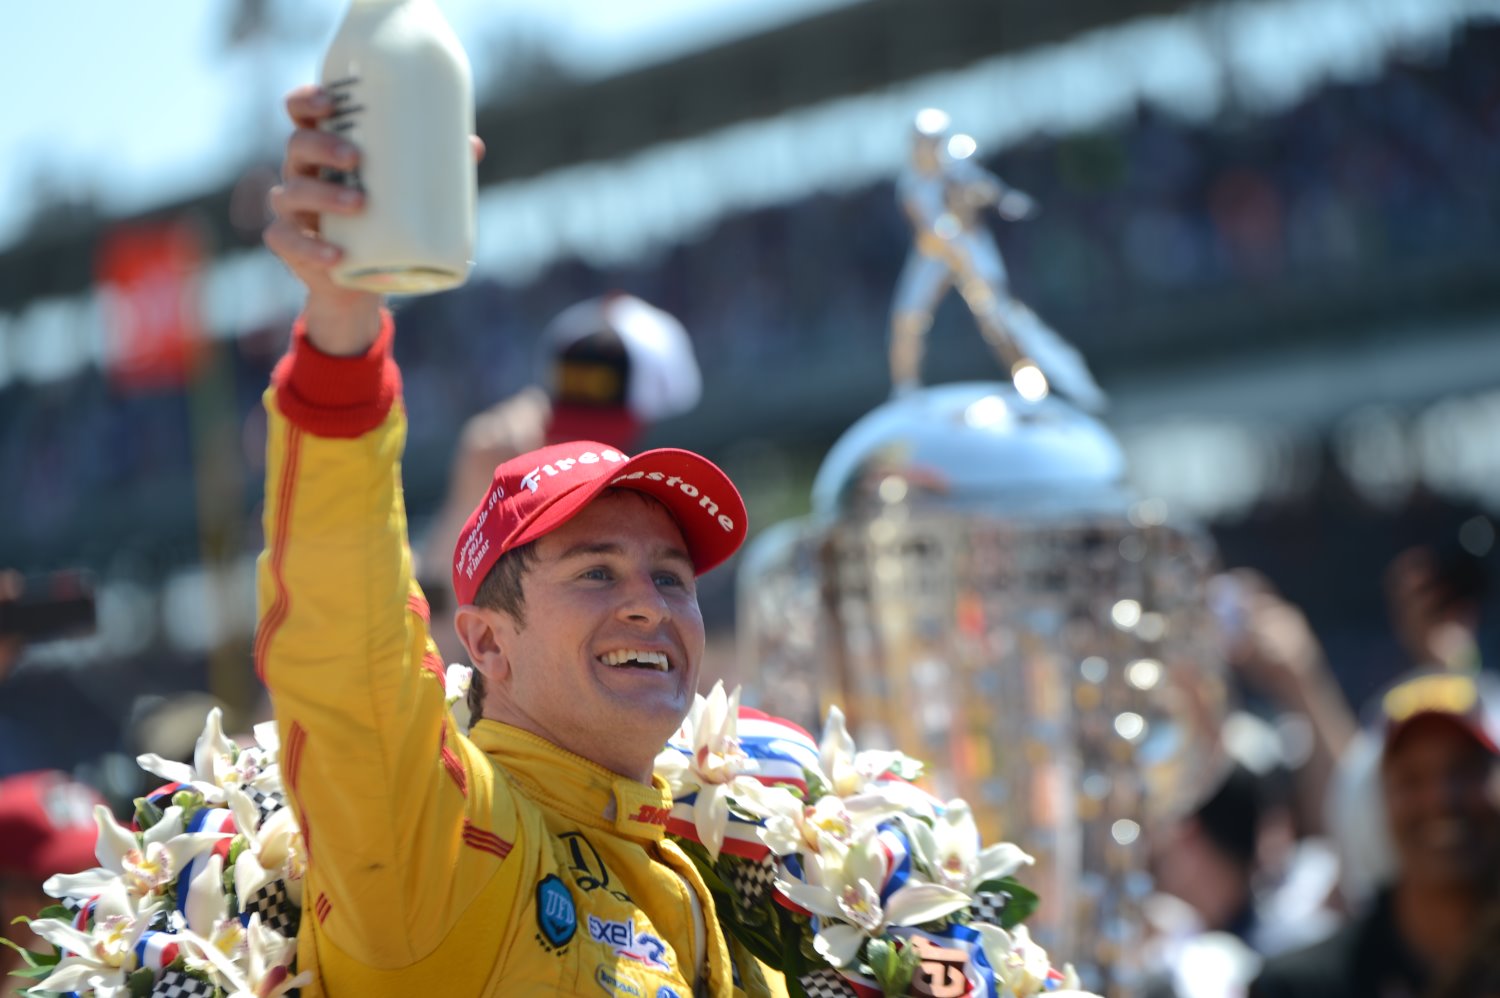 Will Hunter-Reay drink the milk again?